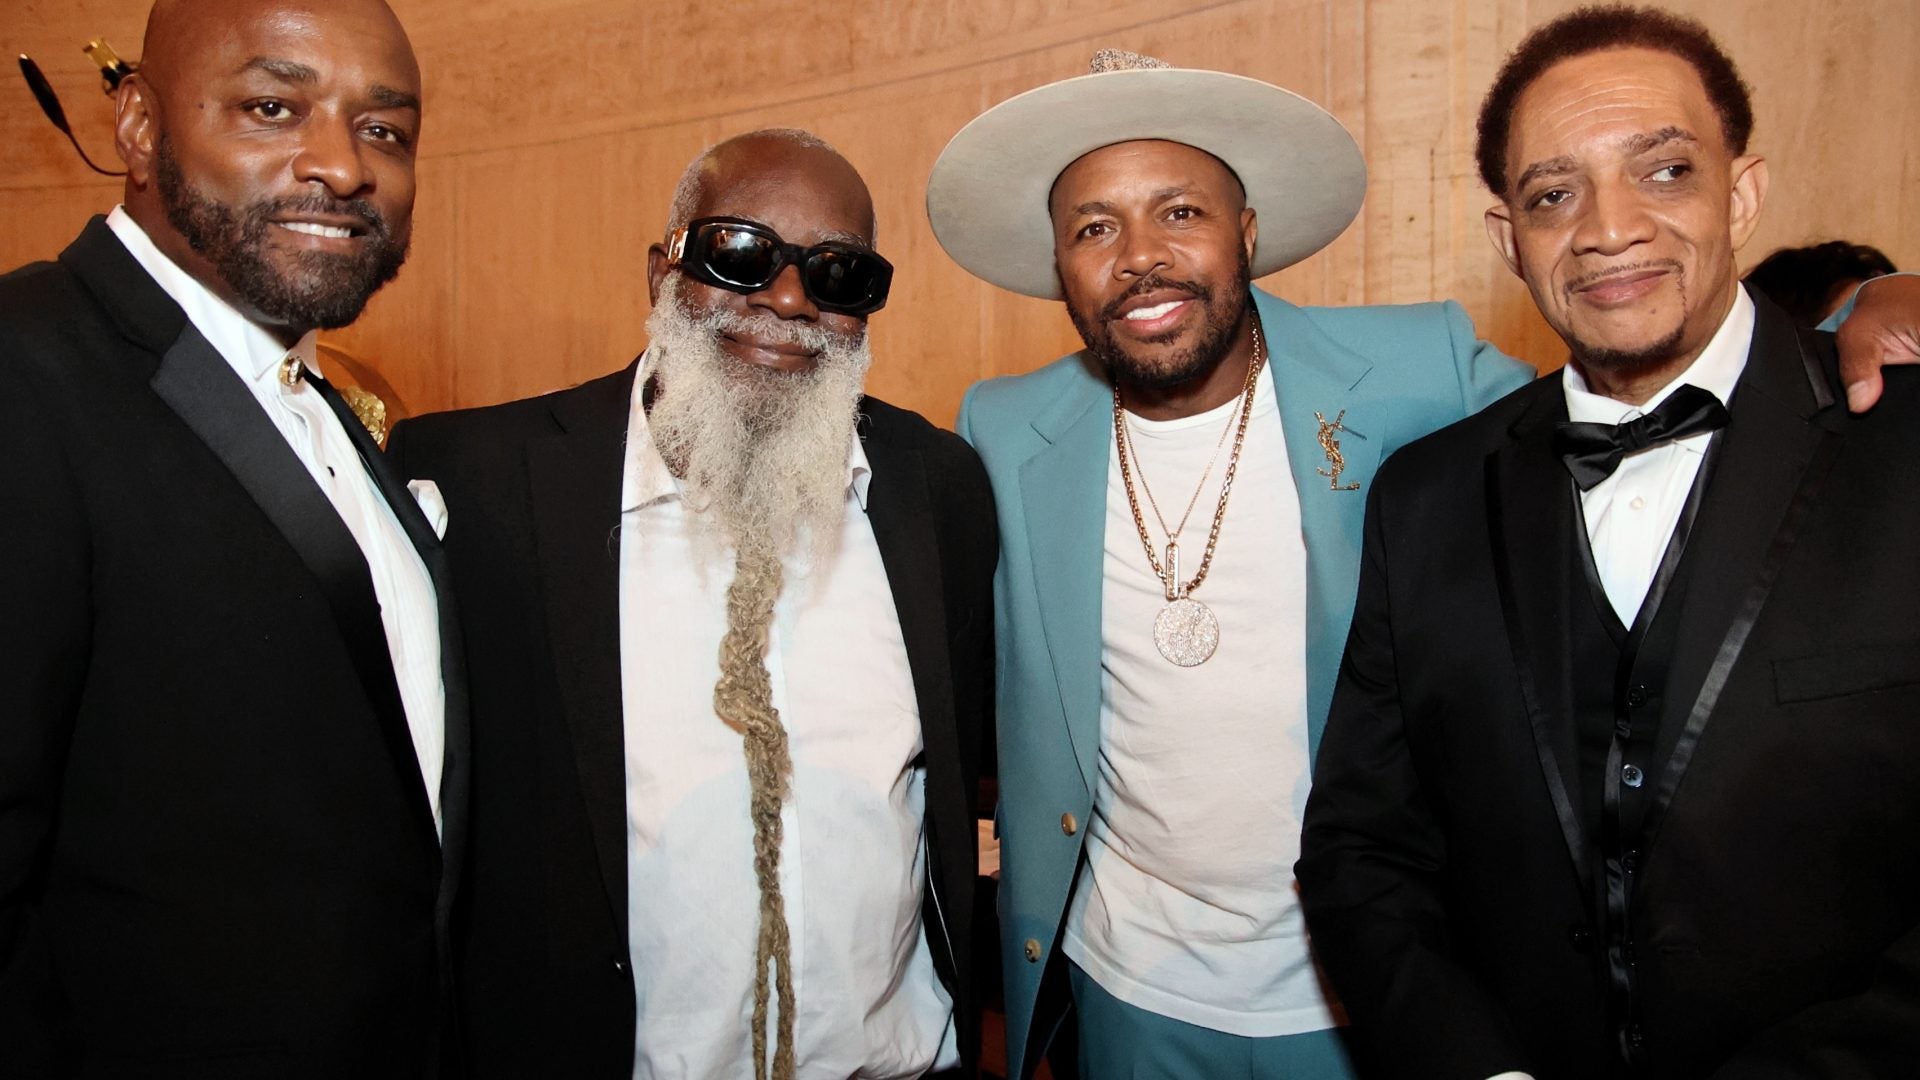 "Hip-Hop Changes Lives": Check Out Highlights From The Inaugural Hip-Hop Museum Benefit Gala